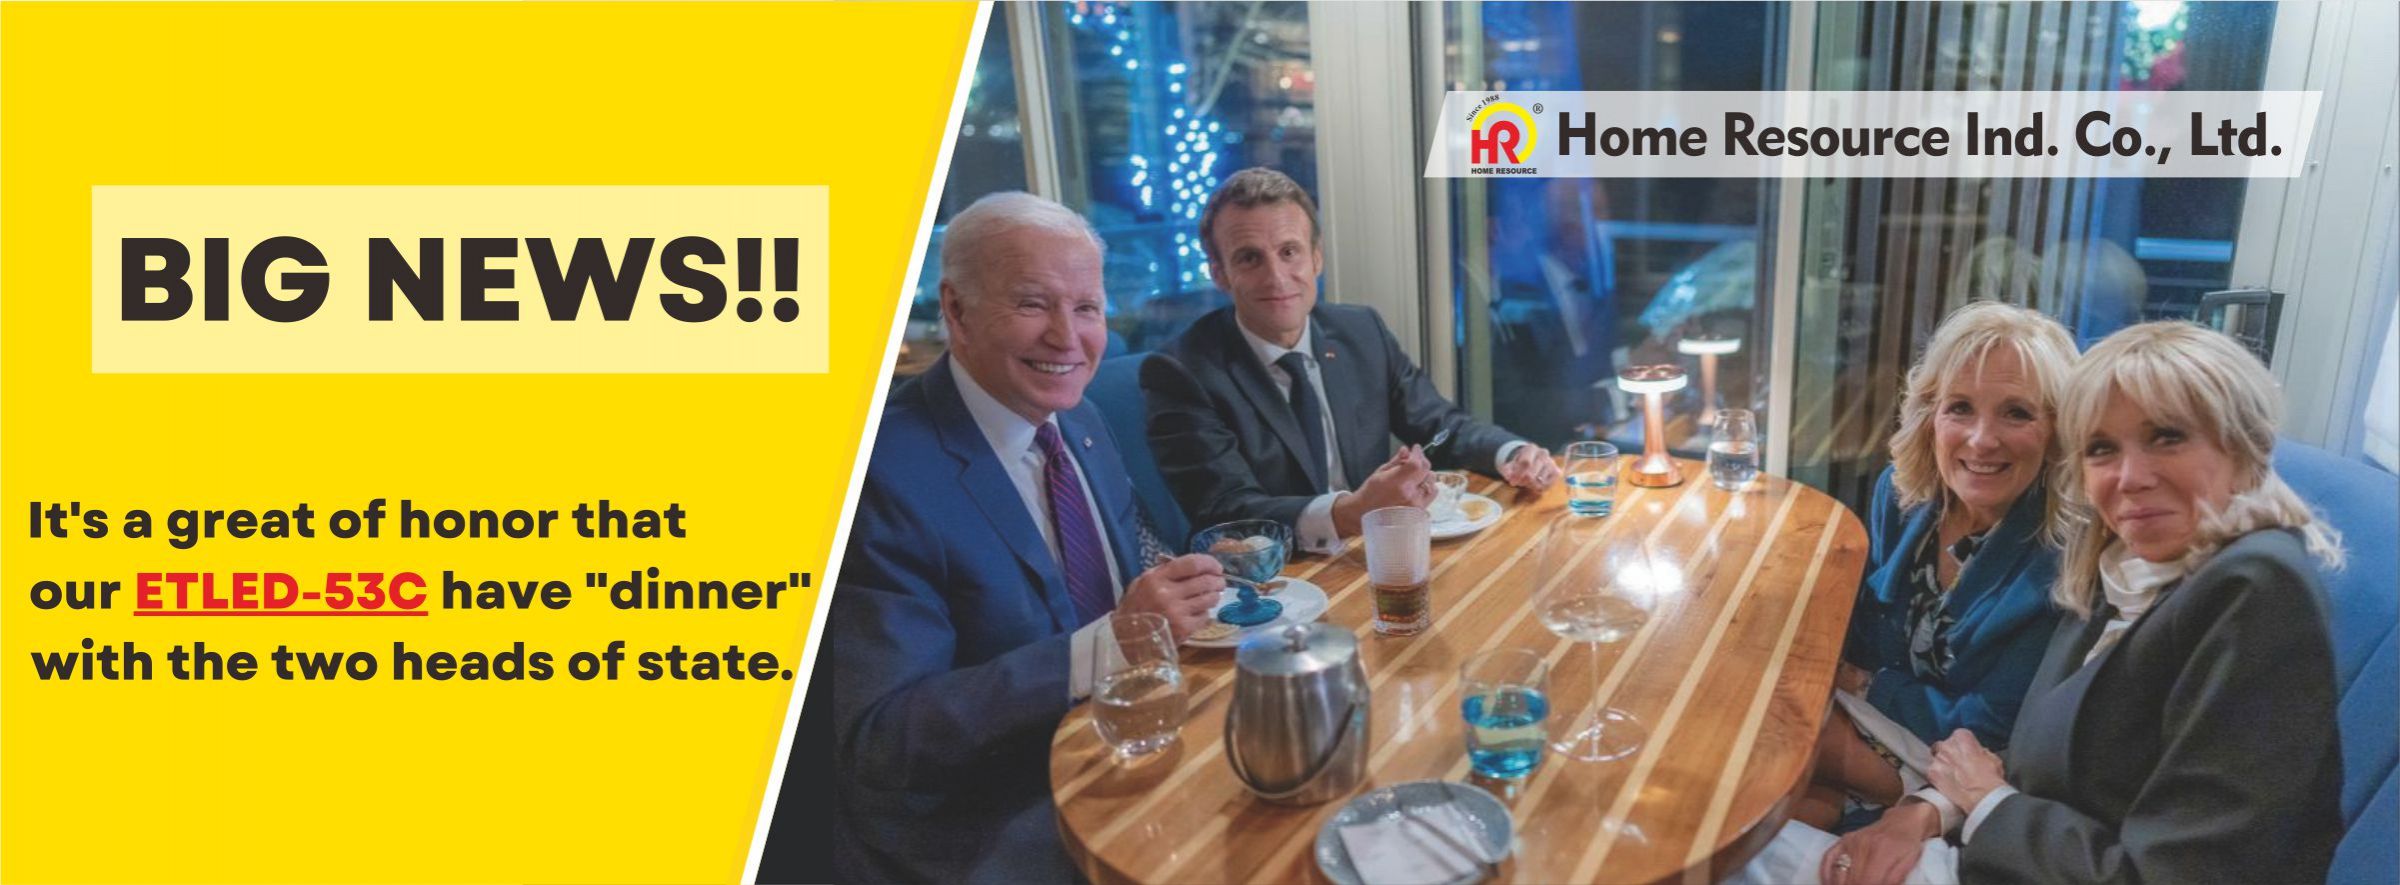 Biden & Macron Having Dinner with Our Lamp - See how our rechargeable lamps bring vibes!